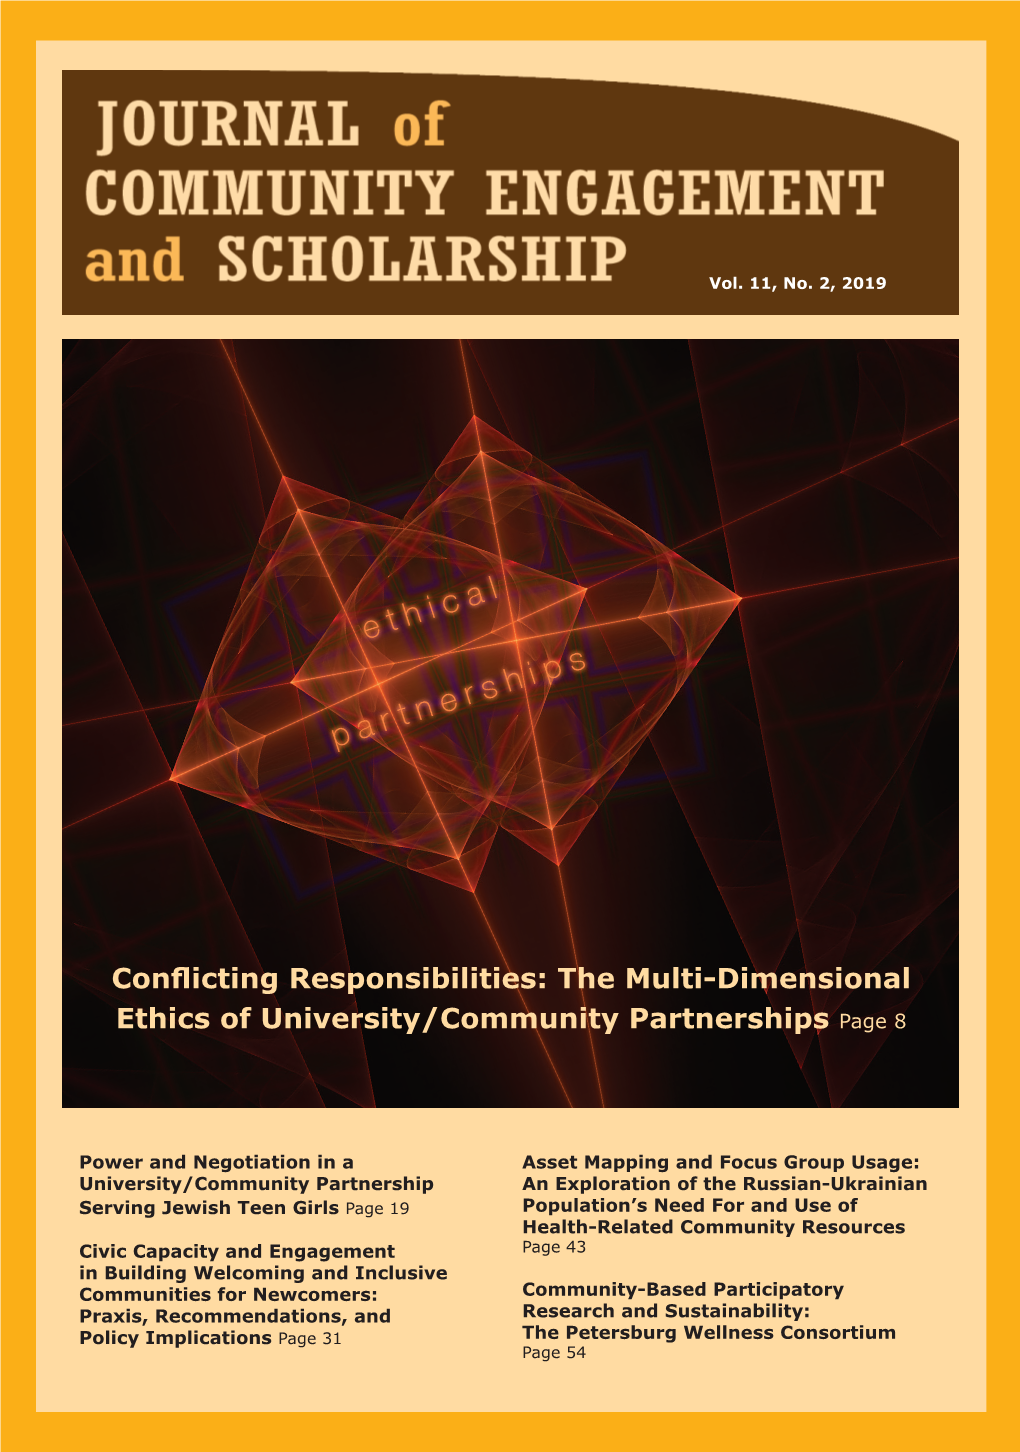 Conflicting Responsibilities: the Multi-Dimensional Ethics of University/Community Partnerships Page 8